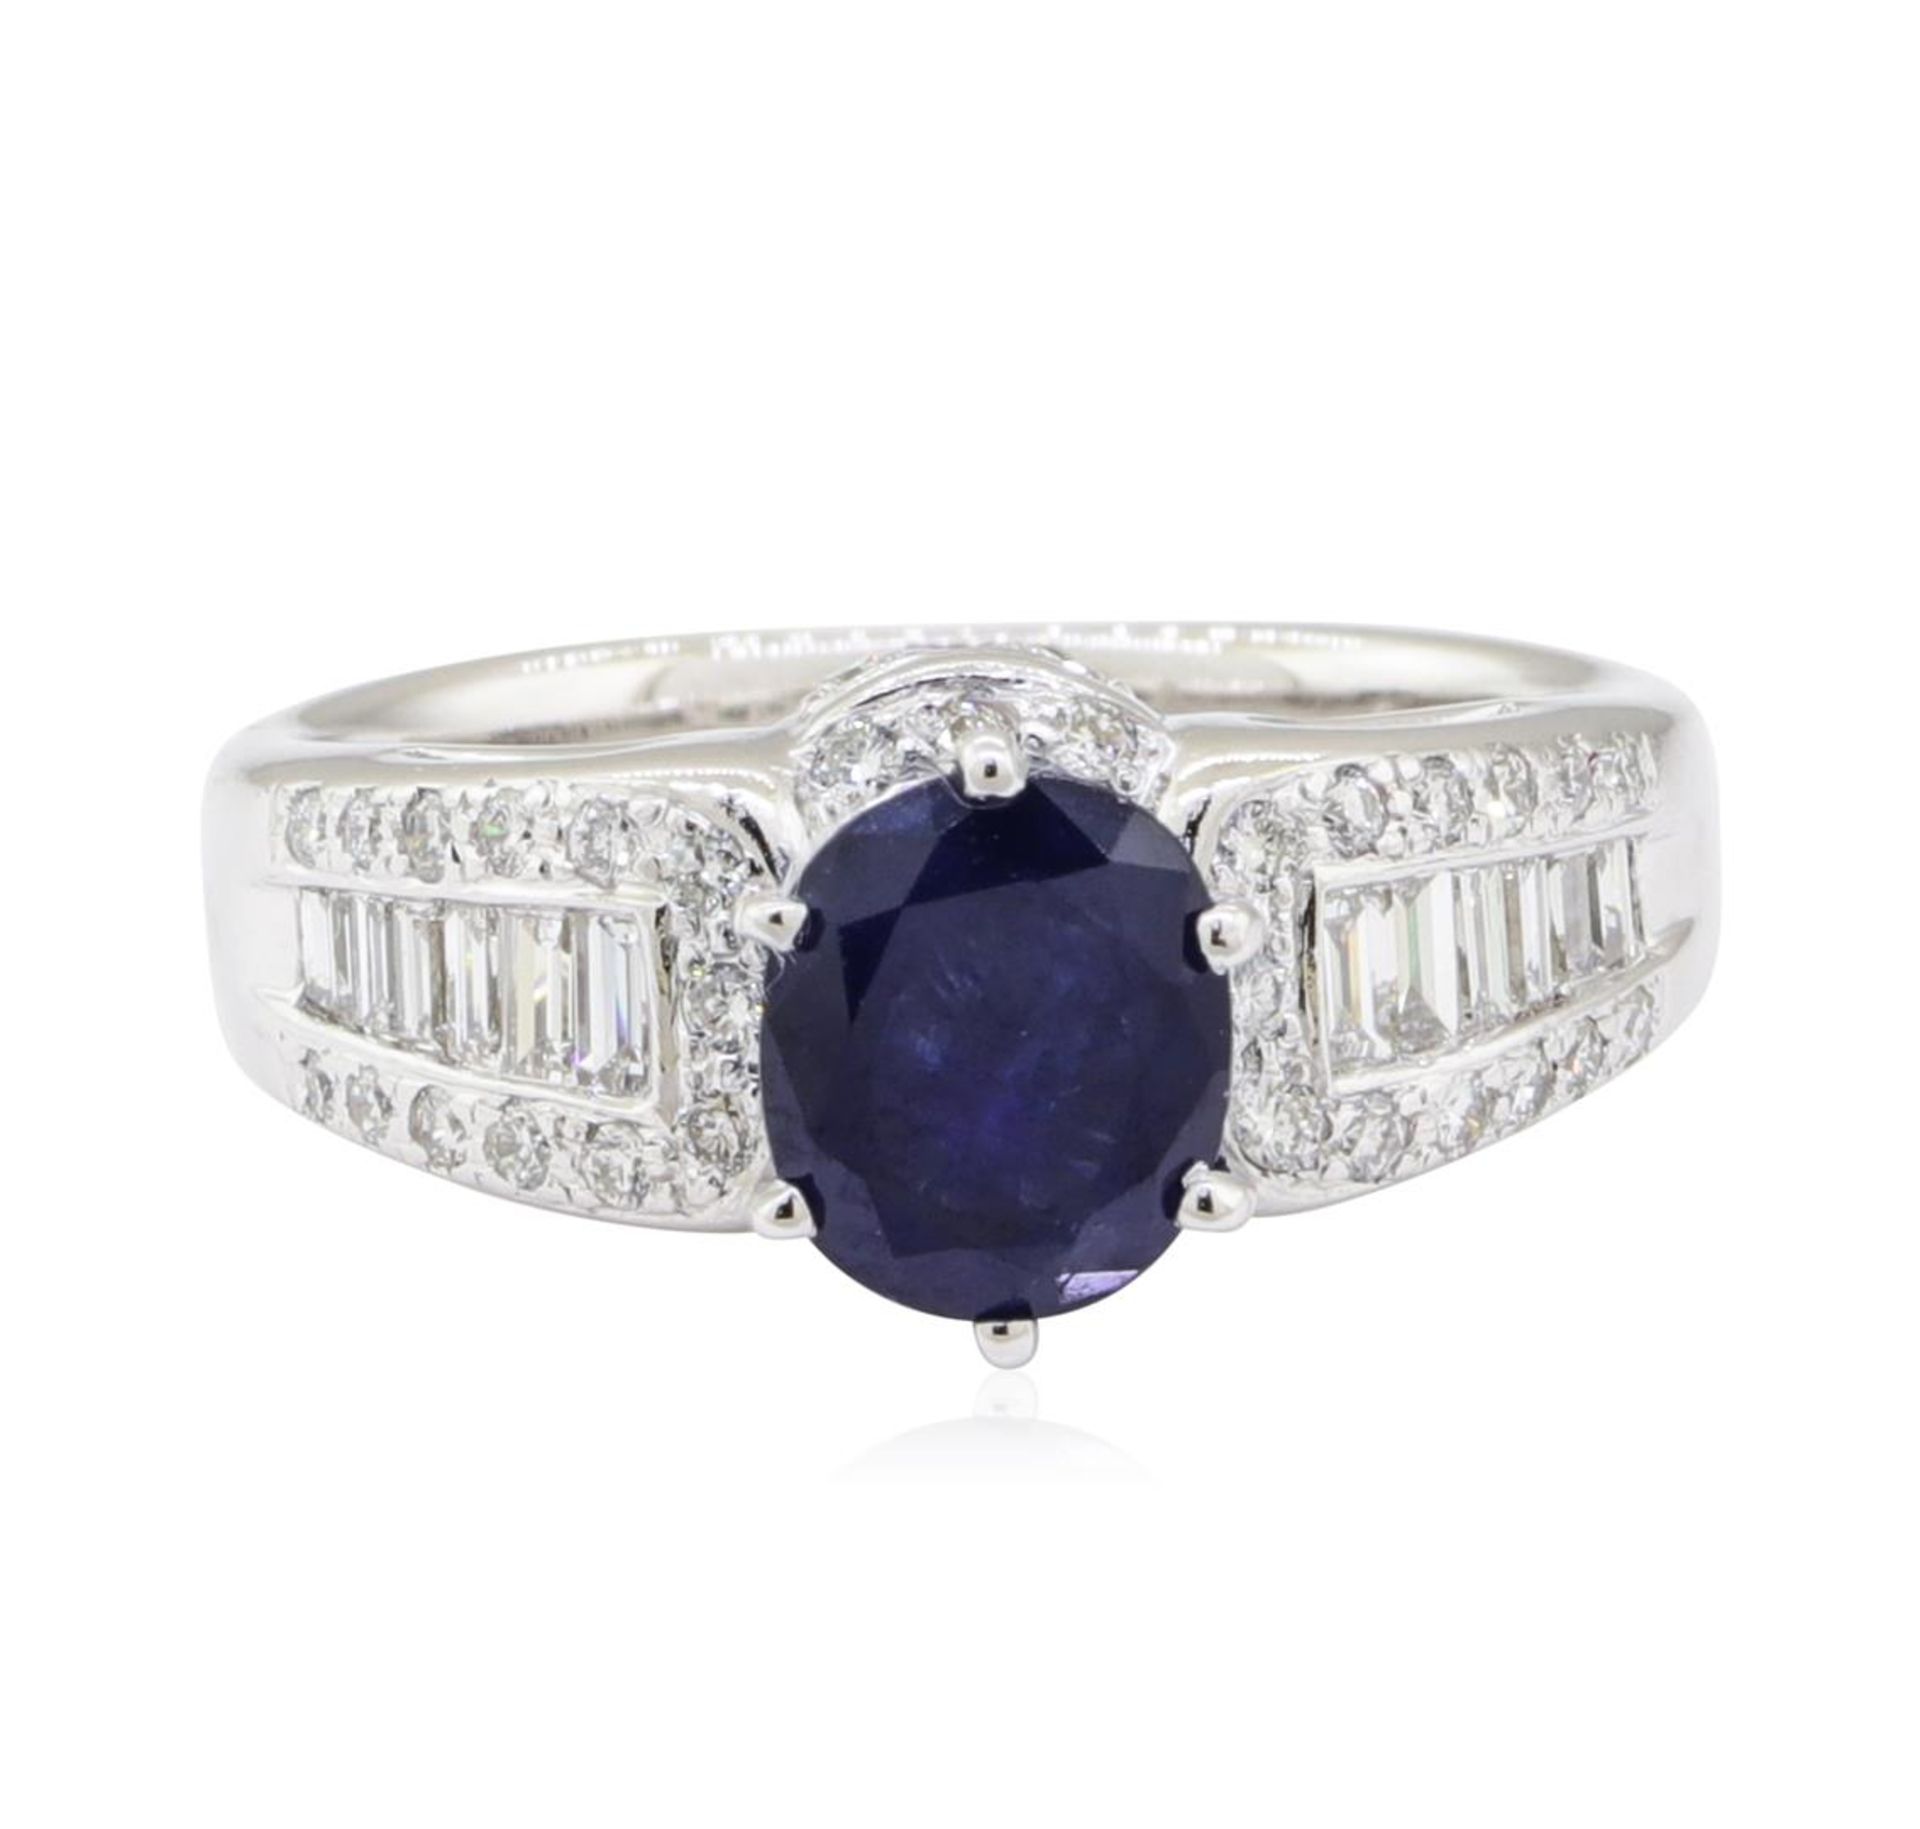 2.01 ctw Sapphire and Diamond Ring - 14KT White Gold - Image 3 of 10